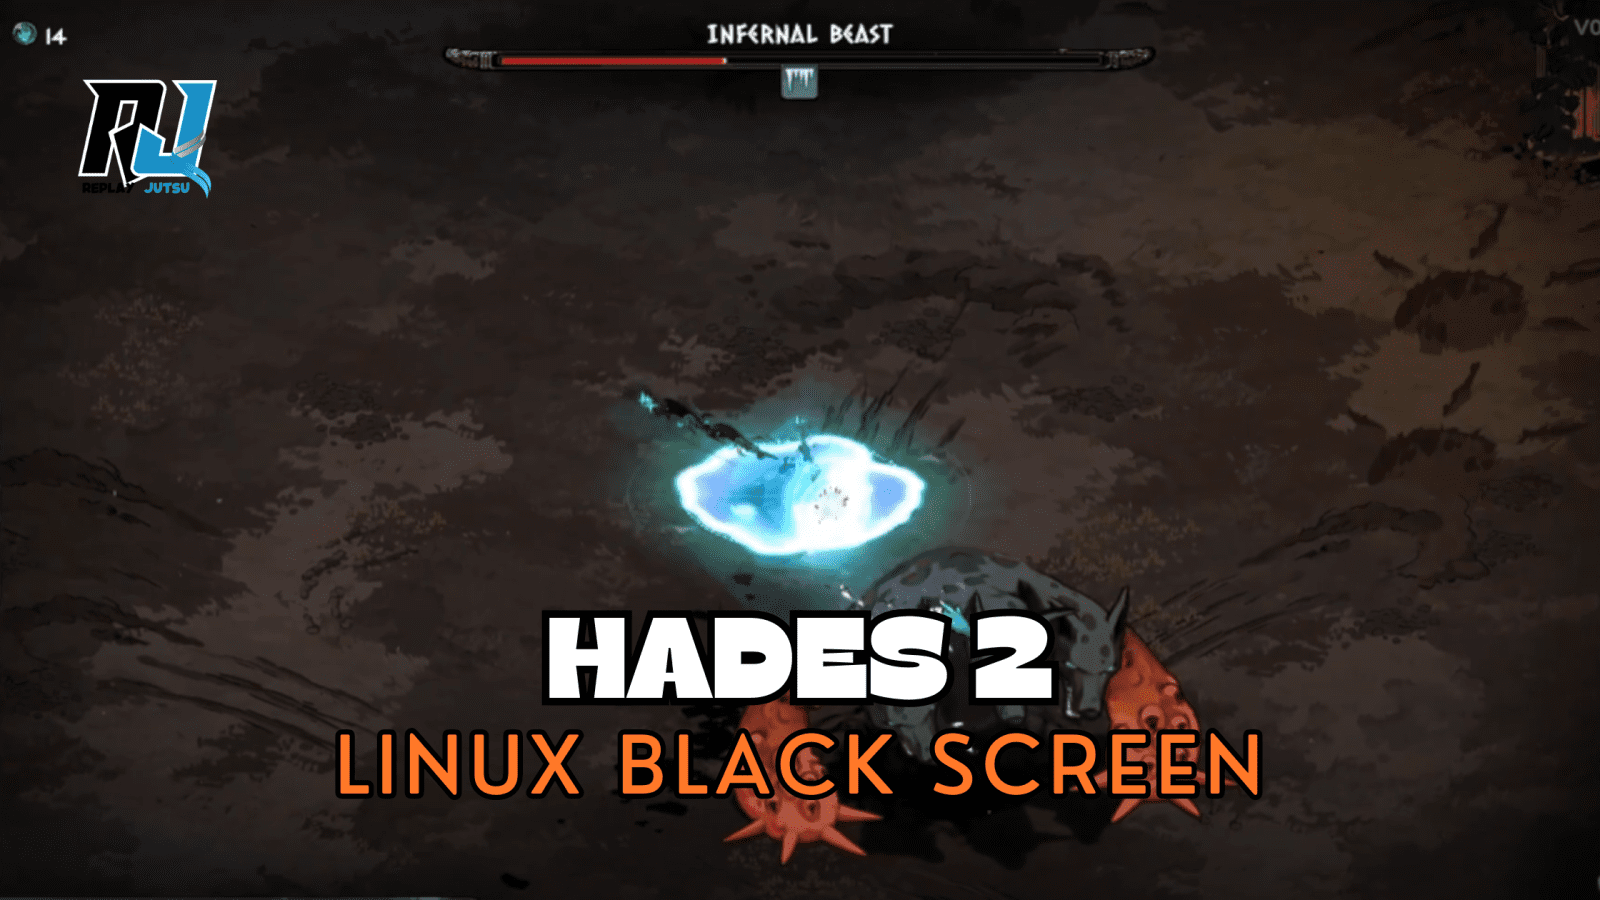 Why Hades 2 Won't Launch on Linux - Players Stuck on Black Screen